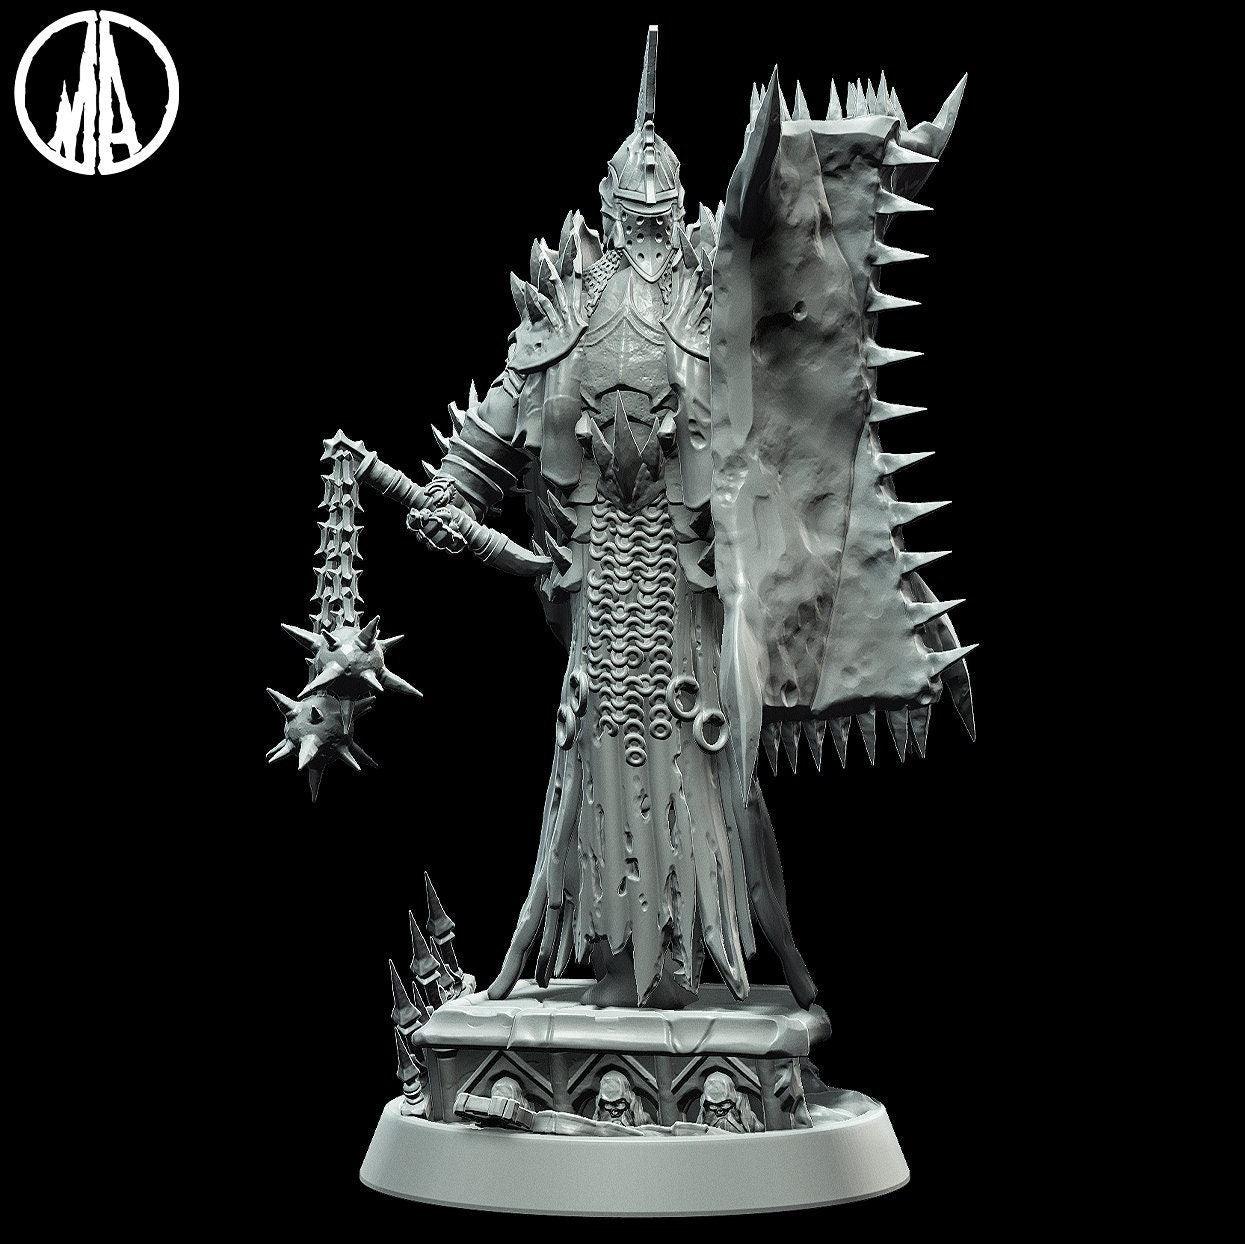 Fallen Crusader Miniature | 3 Poses | Pose B | 28mm scale Tabletop gaming DnD Miniature Dungeons and Dragons,dnd fiend dnd 5e - Plague Miniatures shop for DnD Miniatures